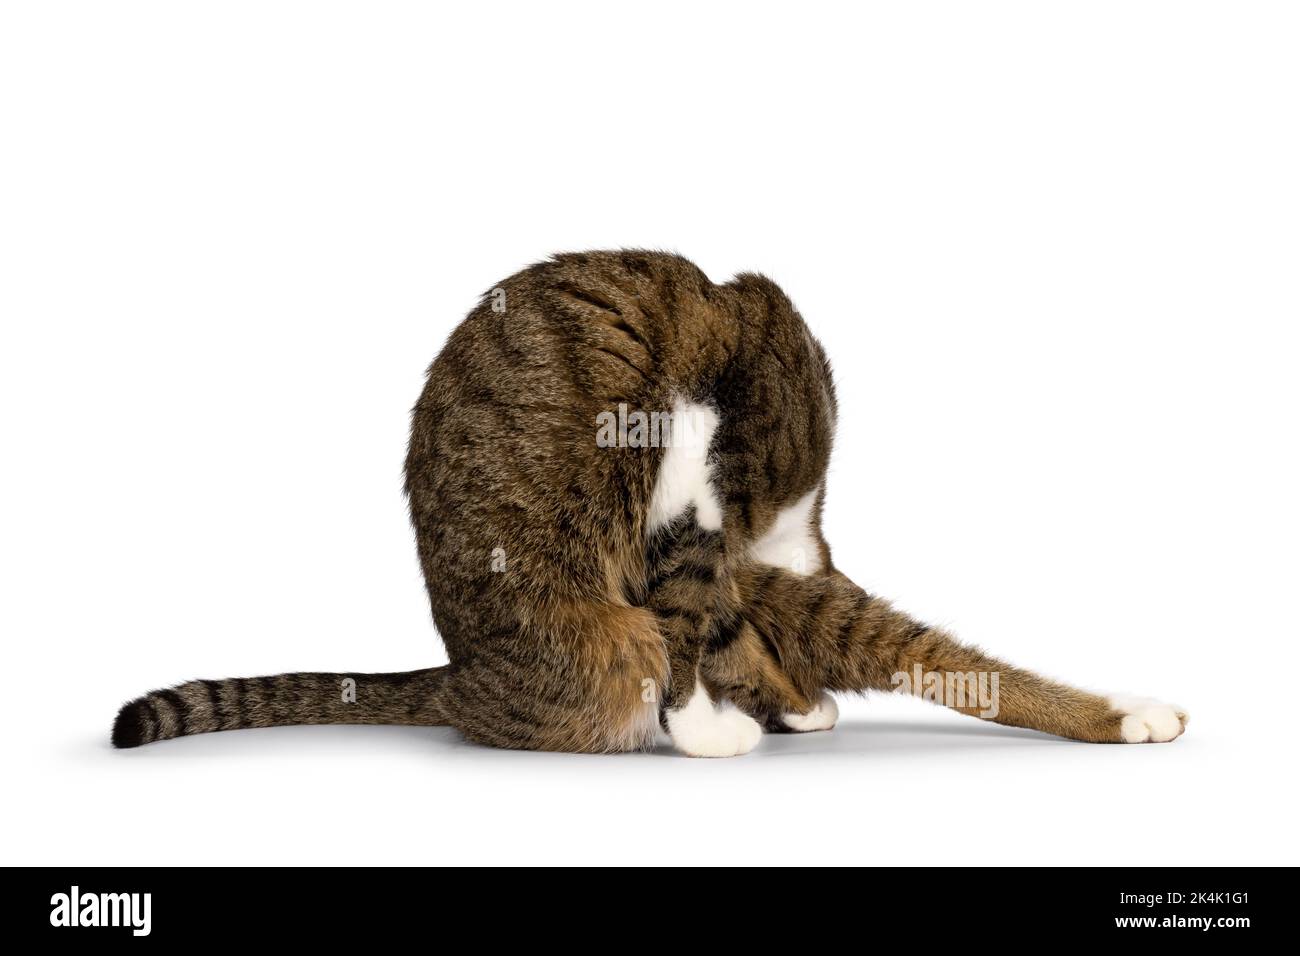 Funny yoga pose Cut Out Stock Images & Pictures - Alamy